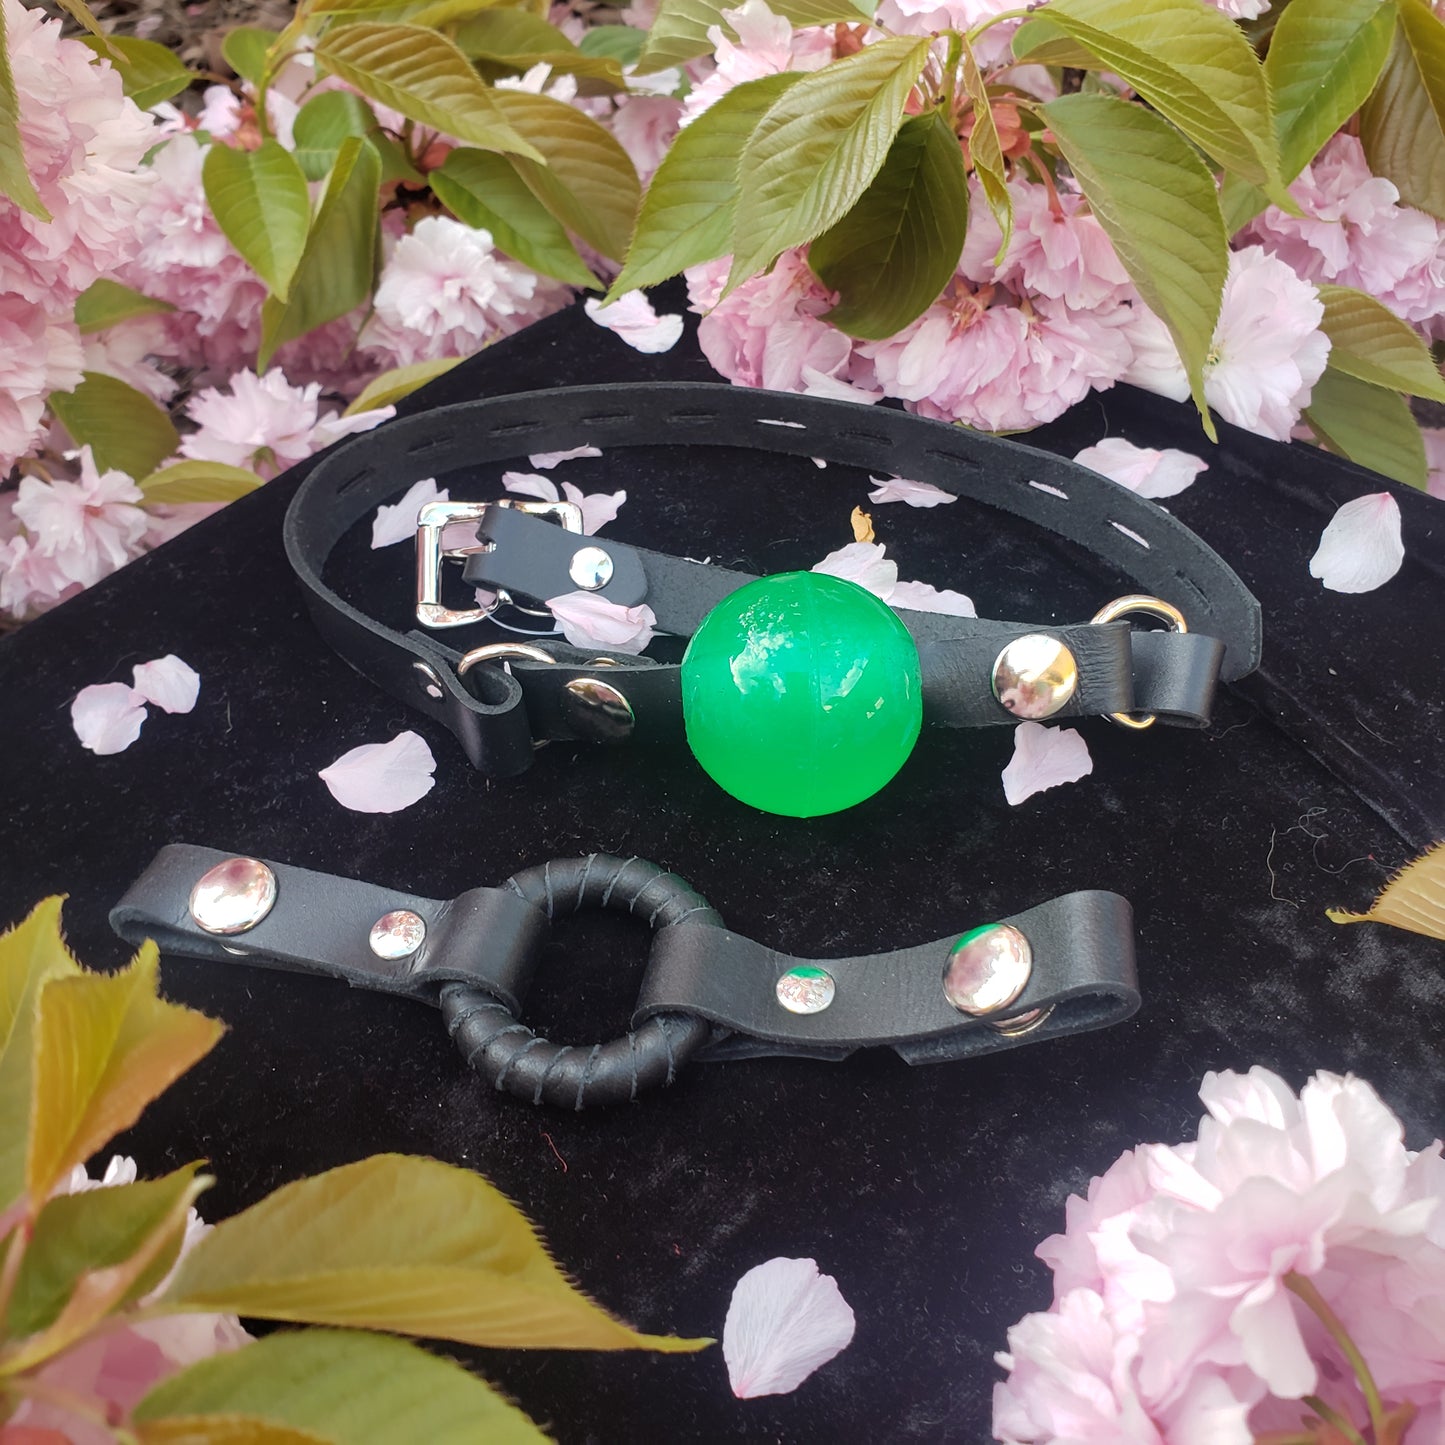 The Interchangeable Ball/Ring Gag shown with a green ball and a ring.